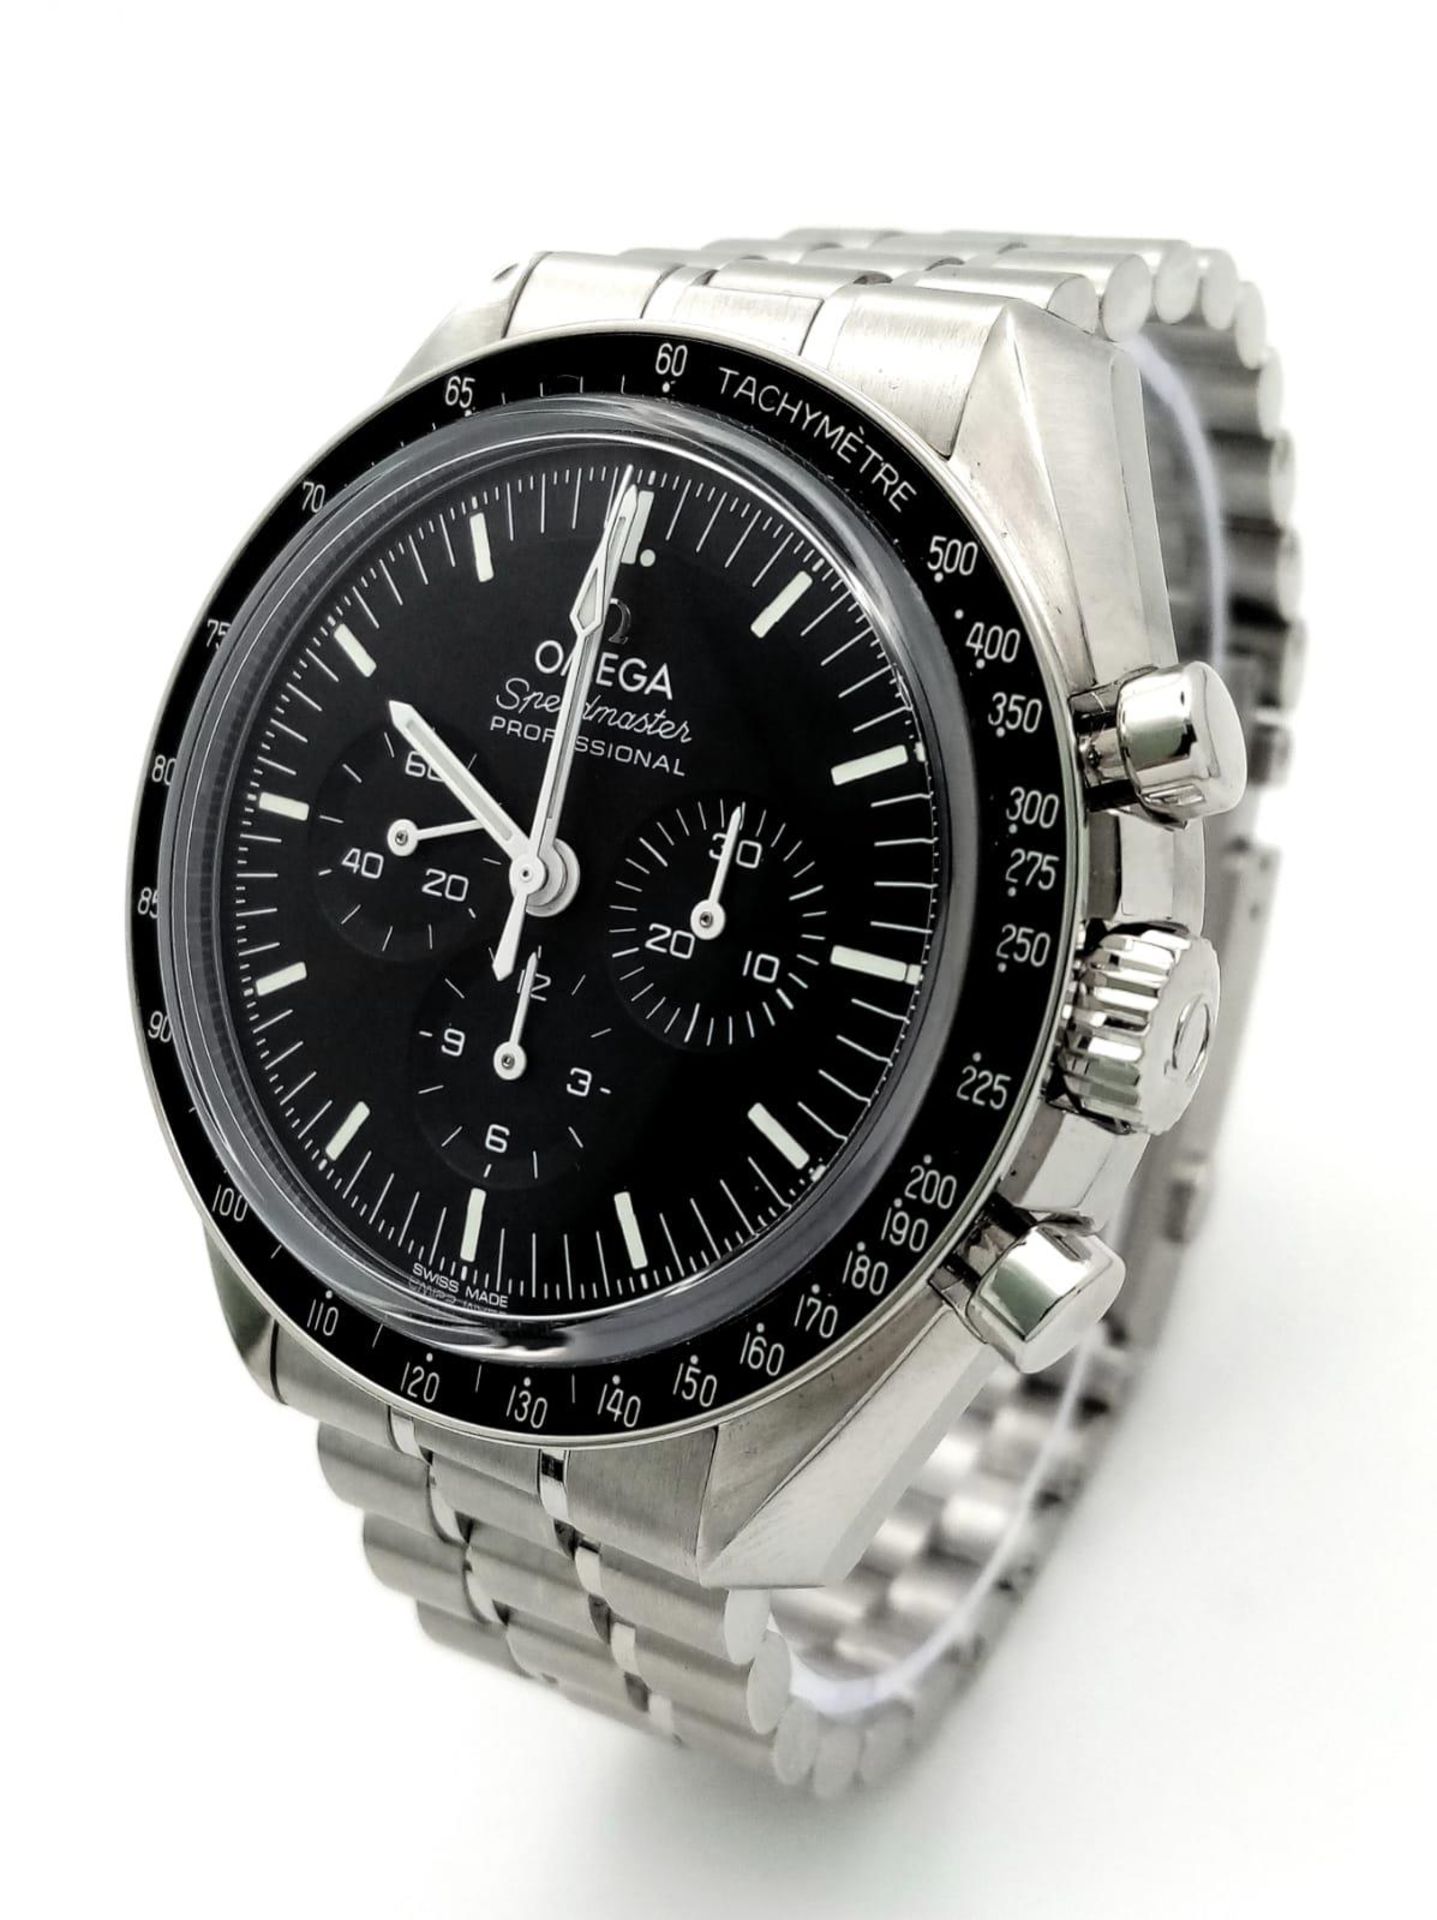 An Omega Speedmaster Moonwatch Chronograph Gents Watch. Stainless steel bracelet and case - 42mm.